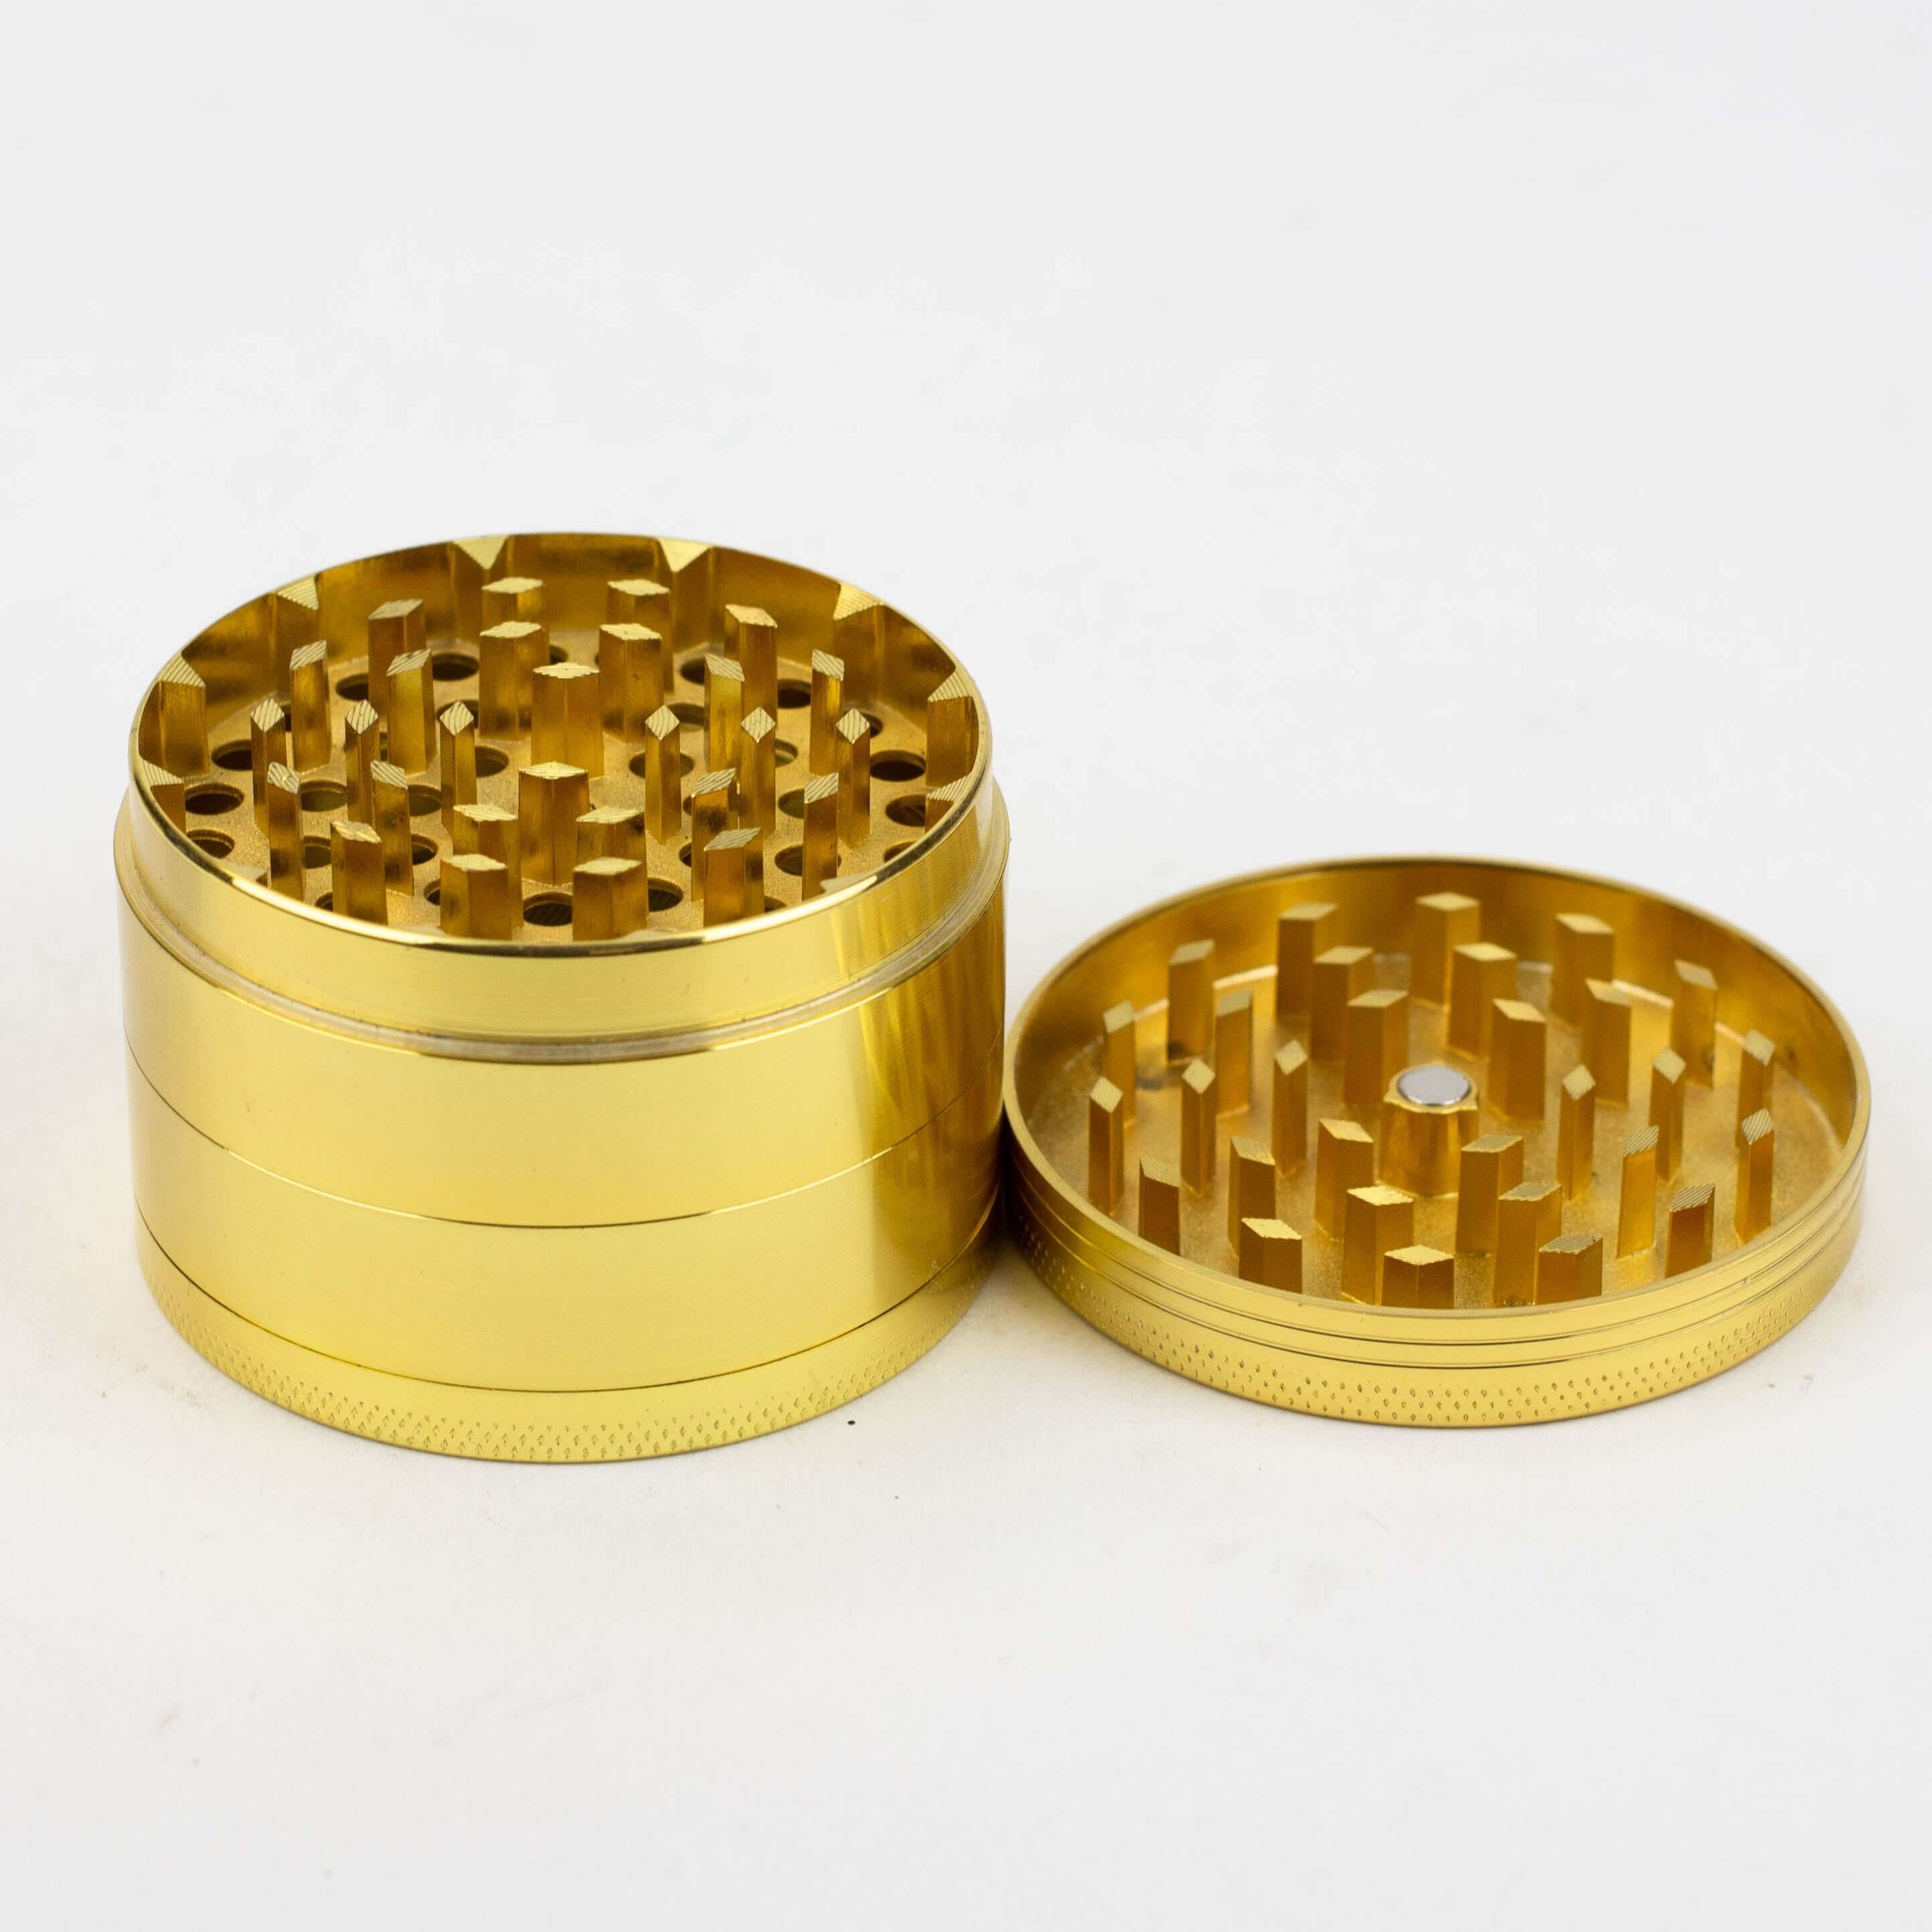 Acid Secs 4 Parts Metal Herb Large Grinder - 63mm
Acid Secs Productions Inc.
4 Parts Diameter: 2.5" / 63mm Height: 1.7" Easy to use Material: Steel Eligible for $15 Flat Rate Shipping
Herb Grinders, Smoking Essentials